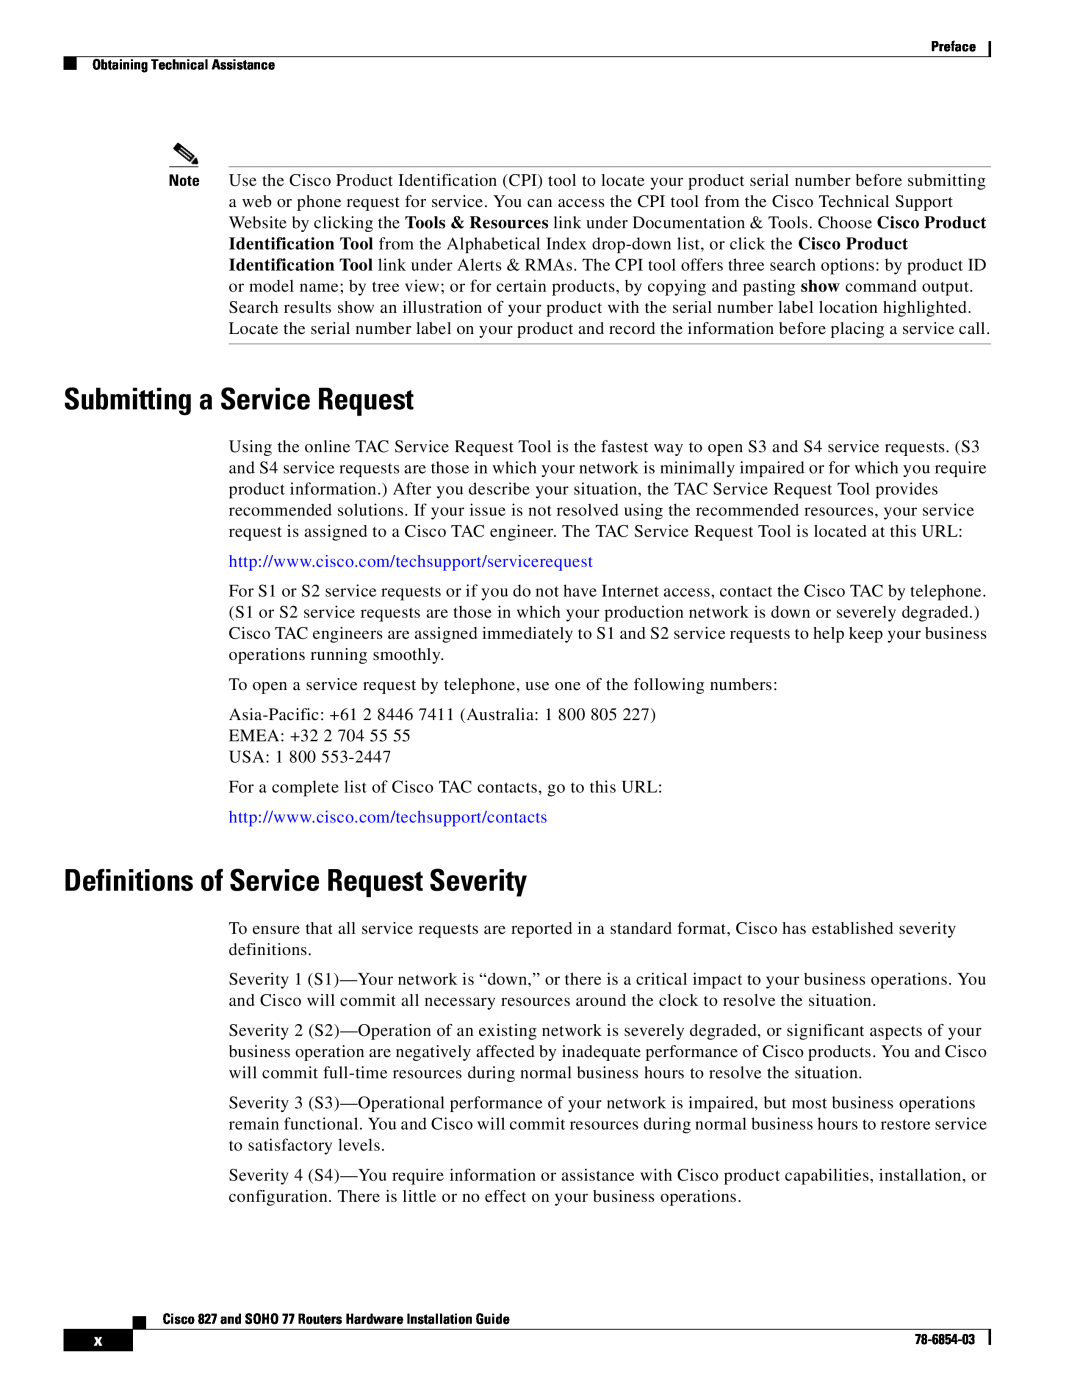 Cisco Systems SOHO 77 manual Submitting a Service Request, Definitions of Service Request Severity 